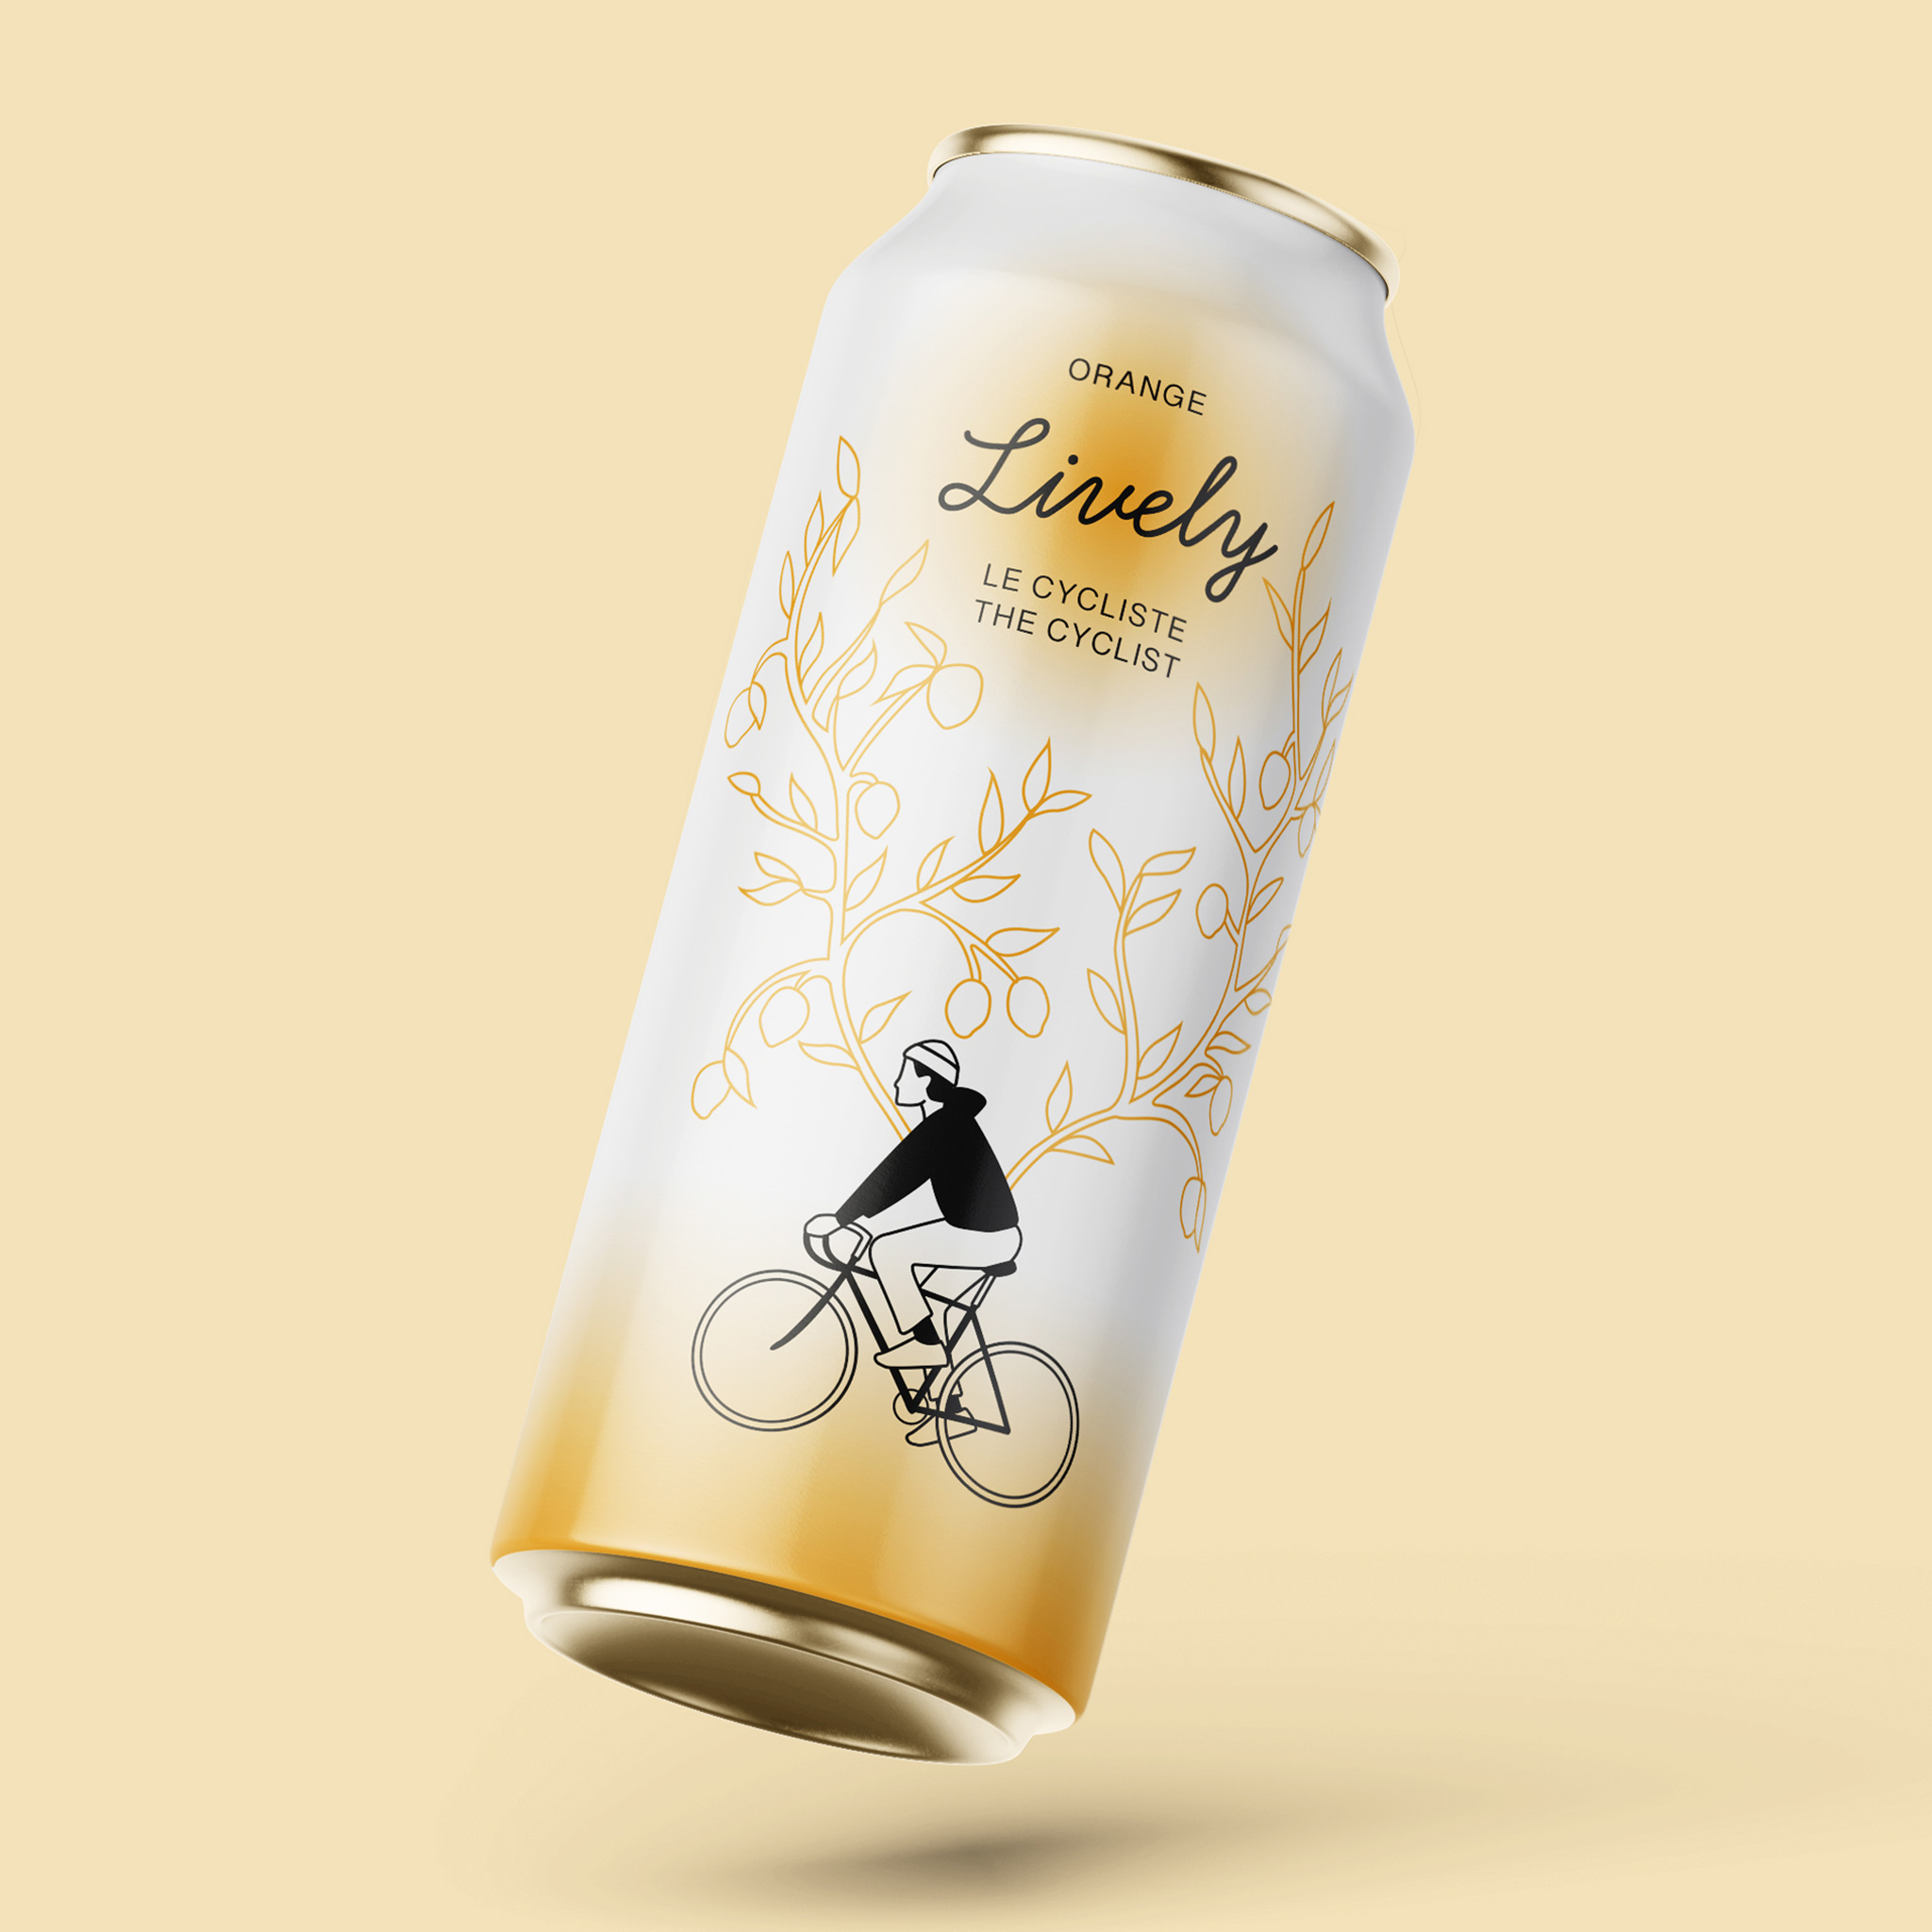 Mockup of packaging design for an imagined all-natural energy drink.